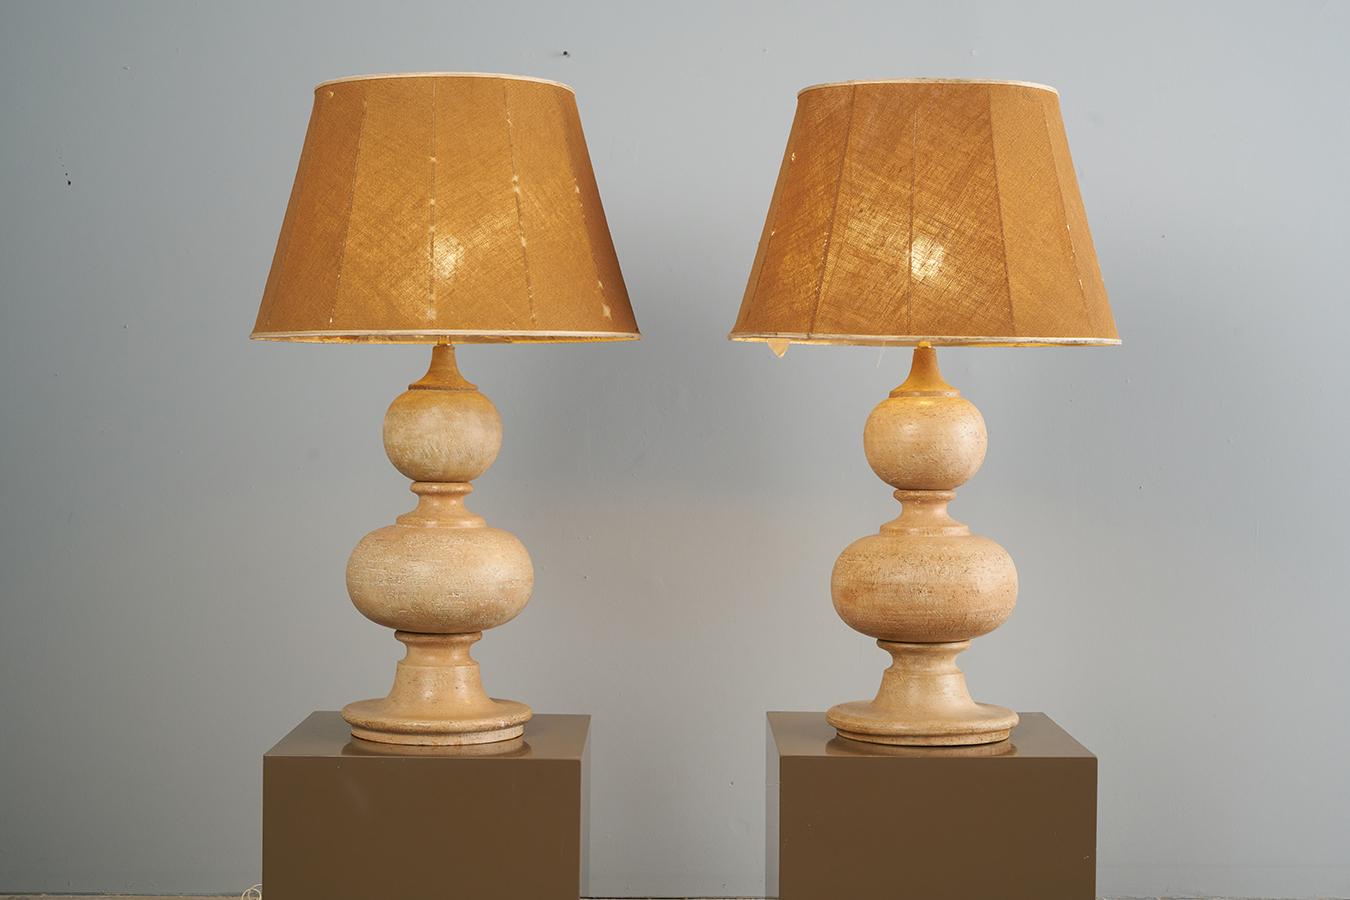 Dimensions given above are with shade. 
Sans shade height to top of socket: 27”
Diameter of lamp body: 11”

Monumental Pair of Earthenware Italian Ceramic Lamps by Ugo Zaccagnini with original shades. 
We are pleased to offer the largest pair of